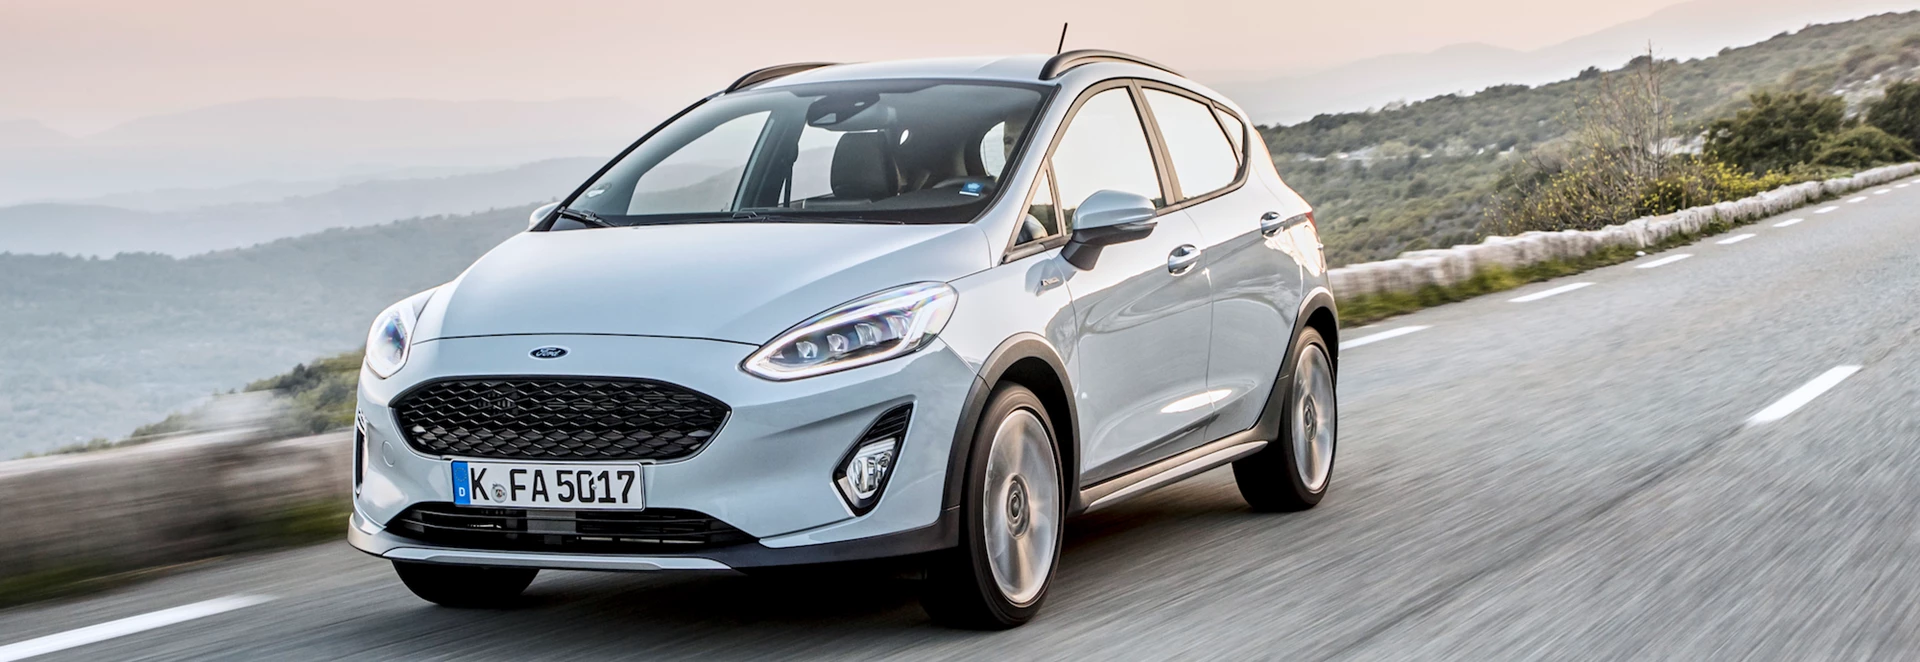 2018 Ford Fiesta Active review